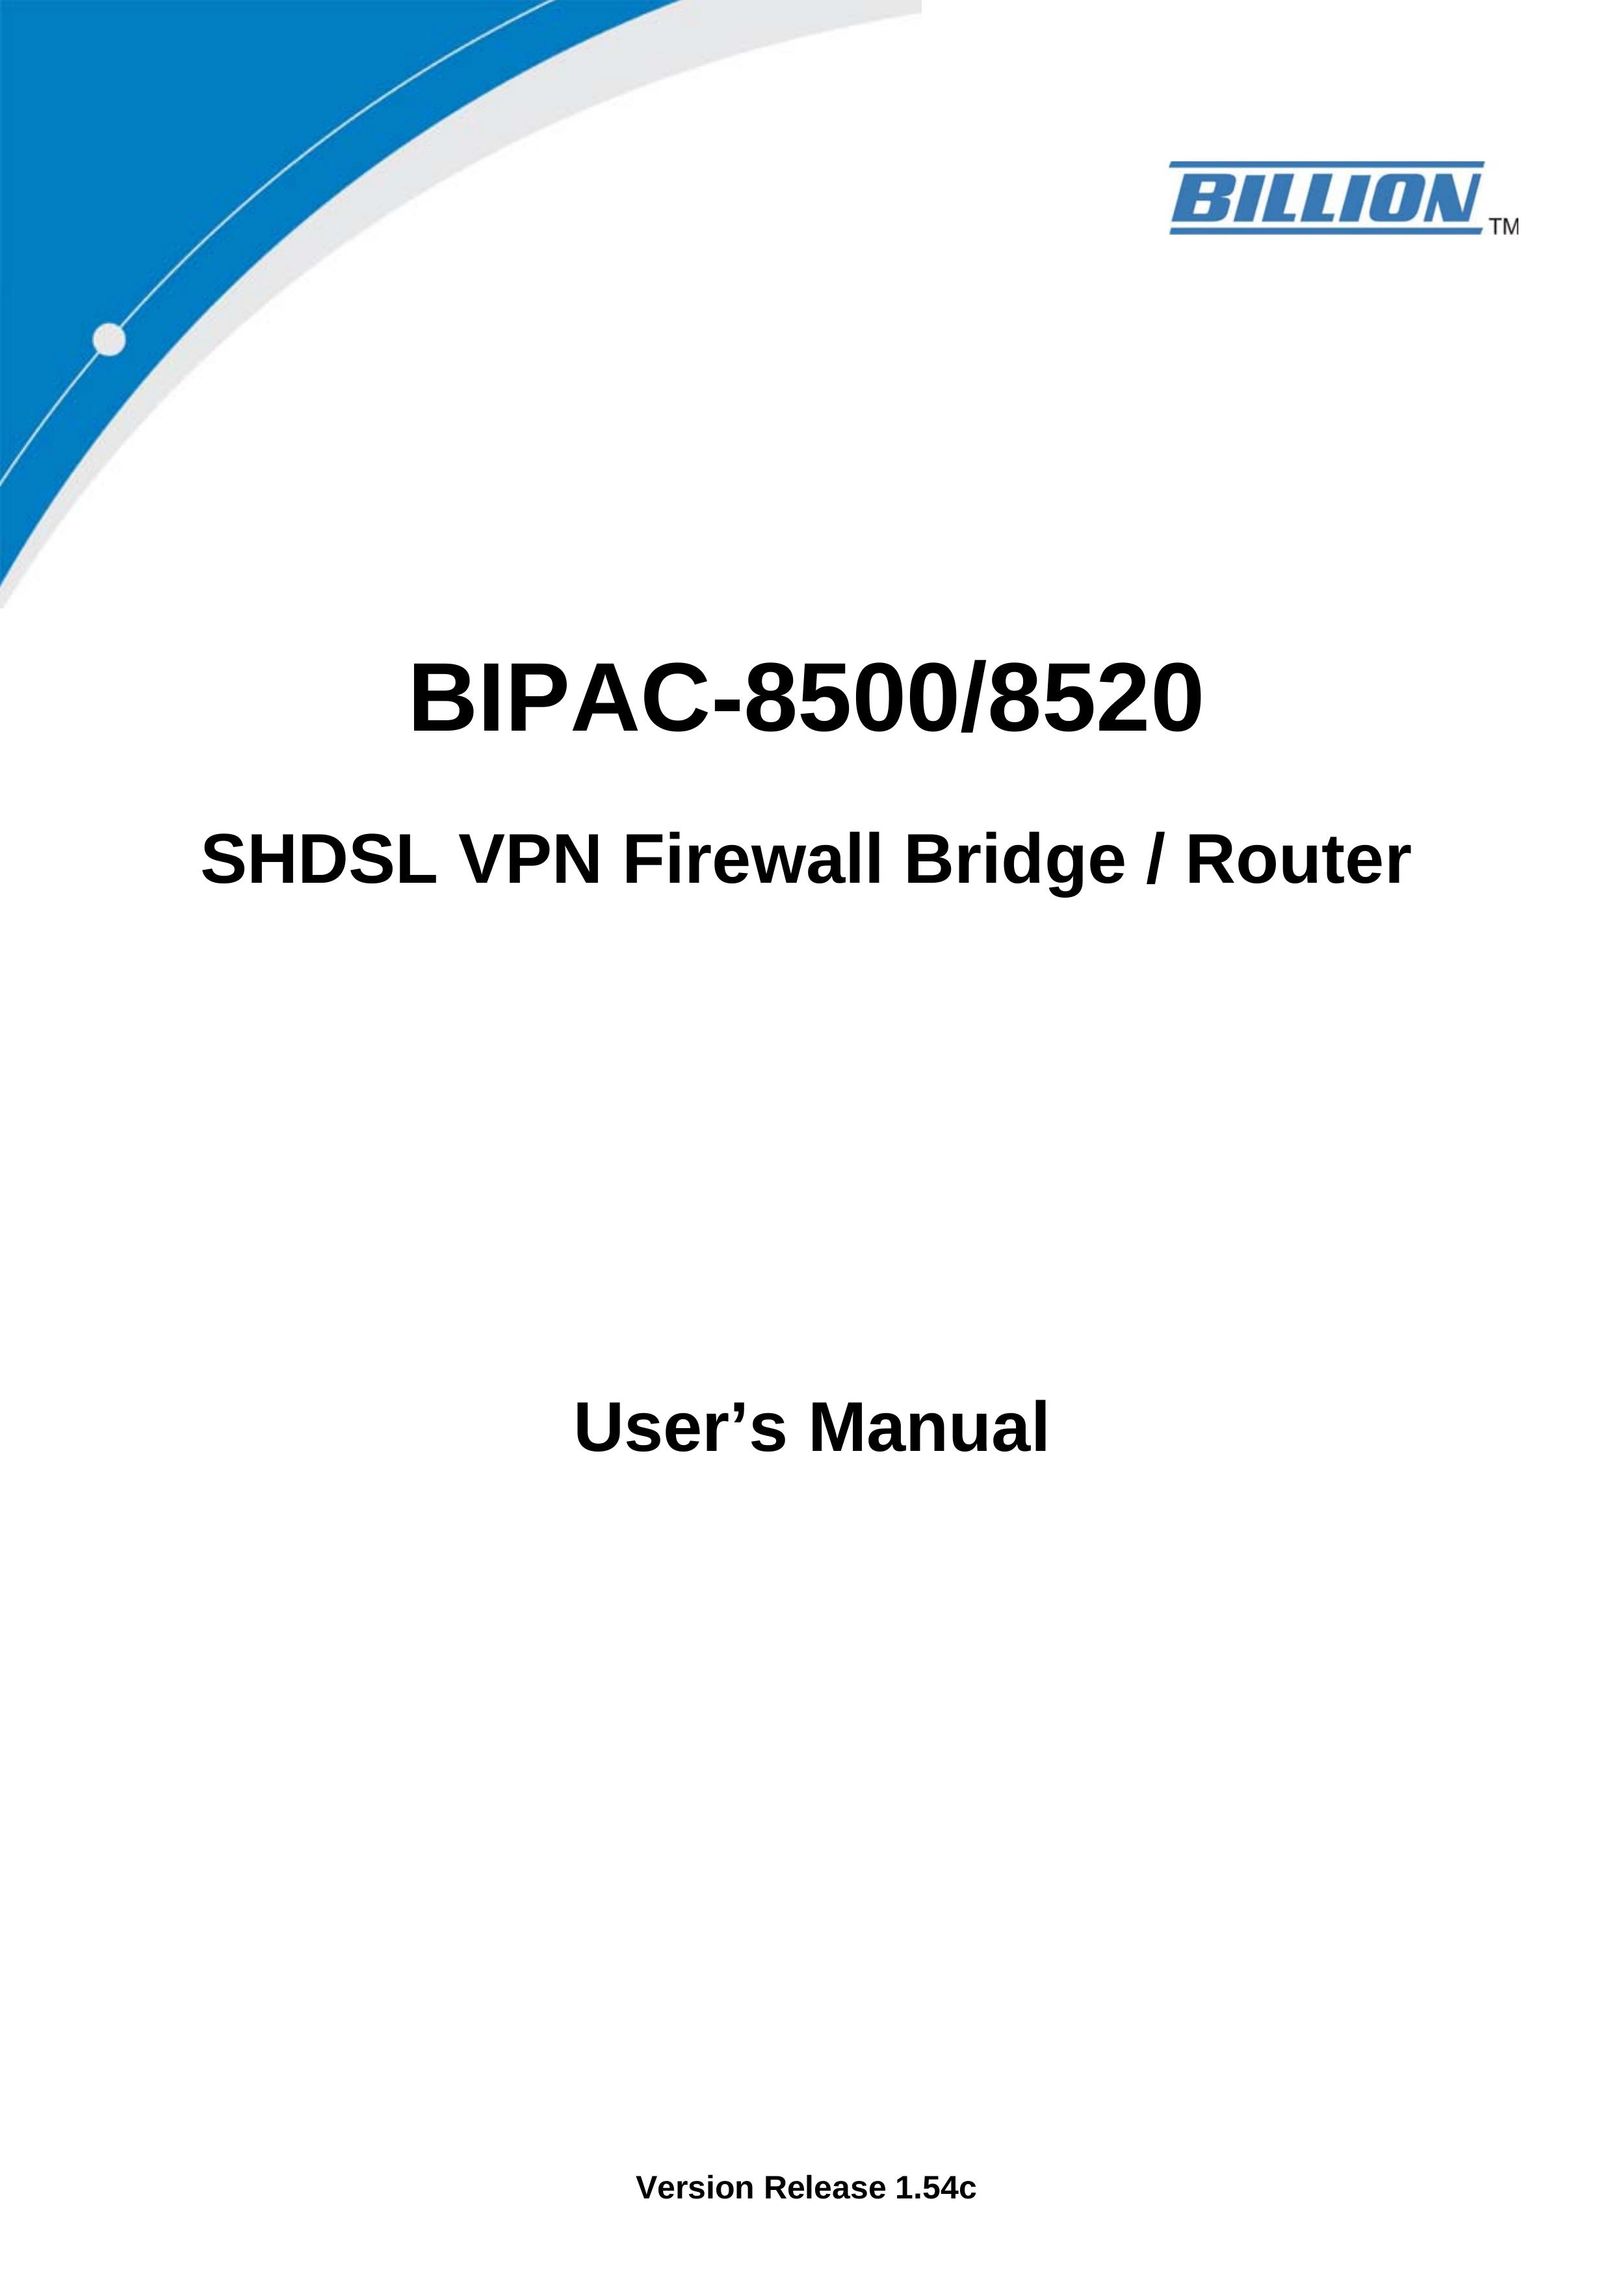 Billion Electric Company 8500 Network Router User Manual